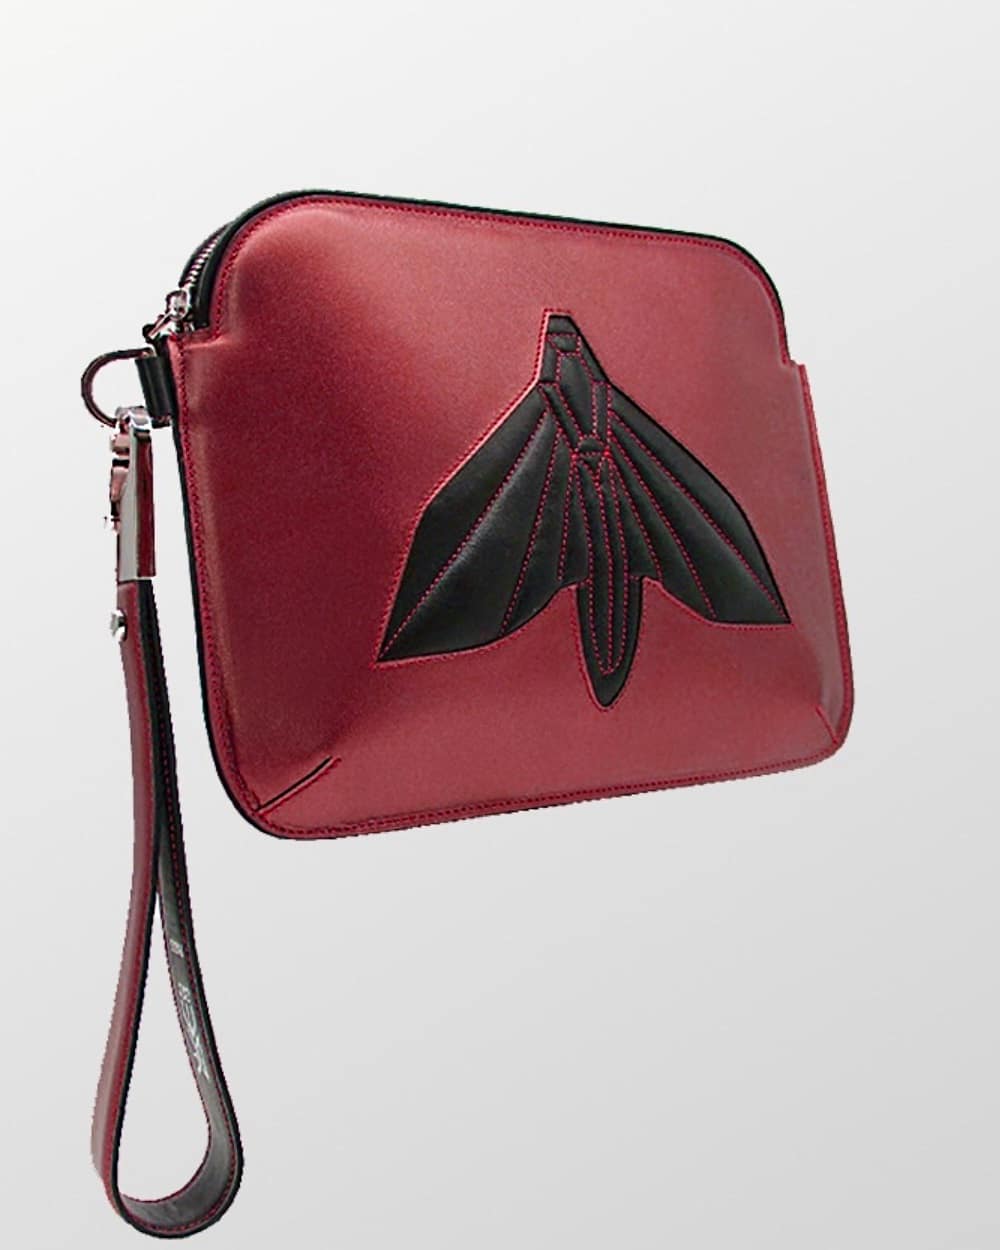 Pouch / Clutch in iridescent red leather with central padded iconic Dea-Cult Sphinx motif. Side view.